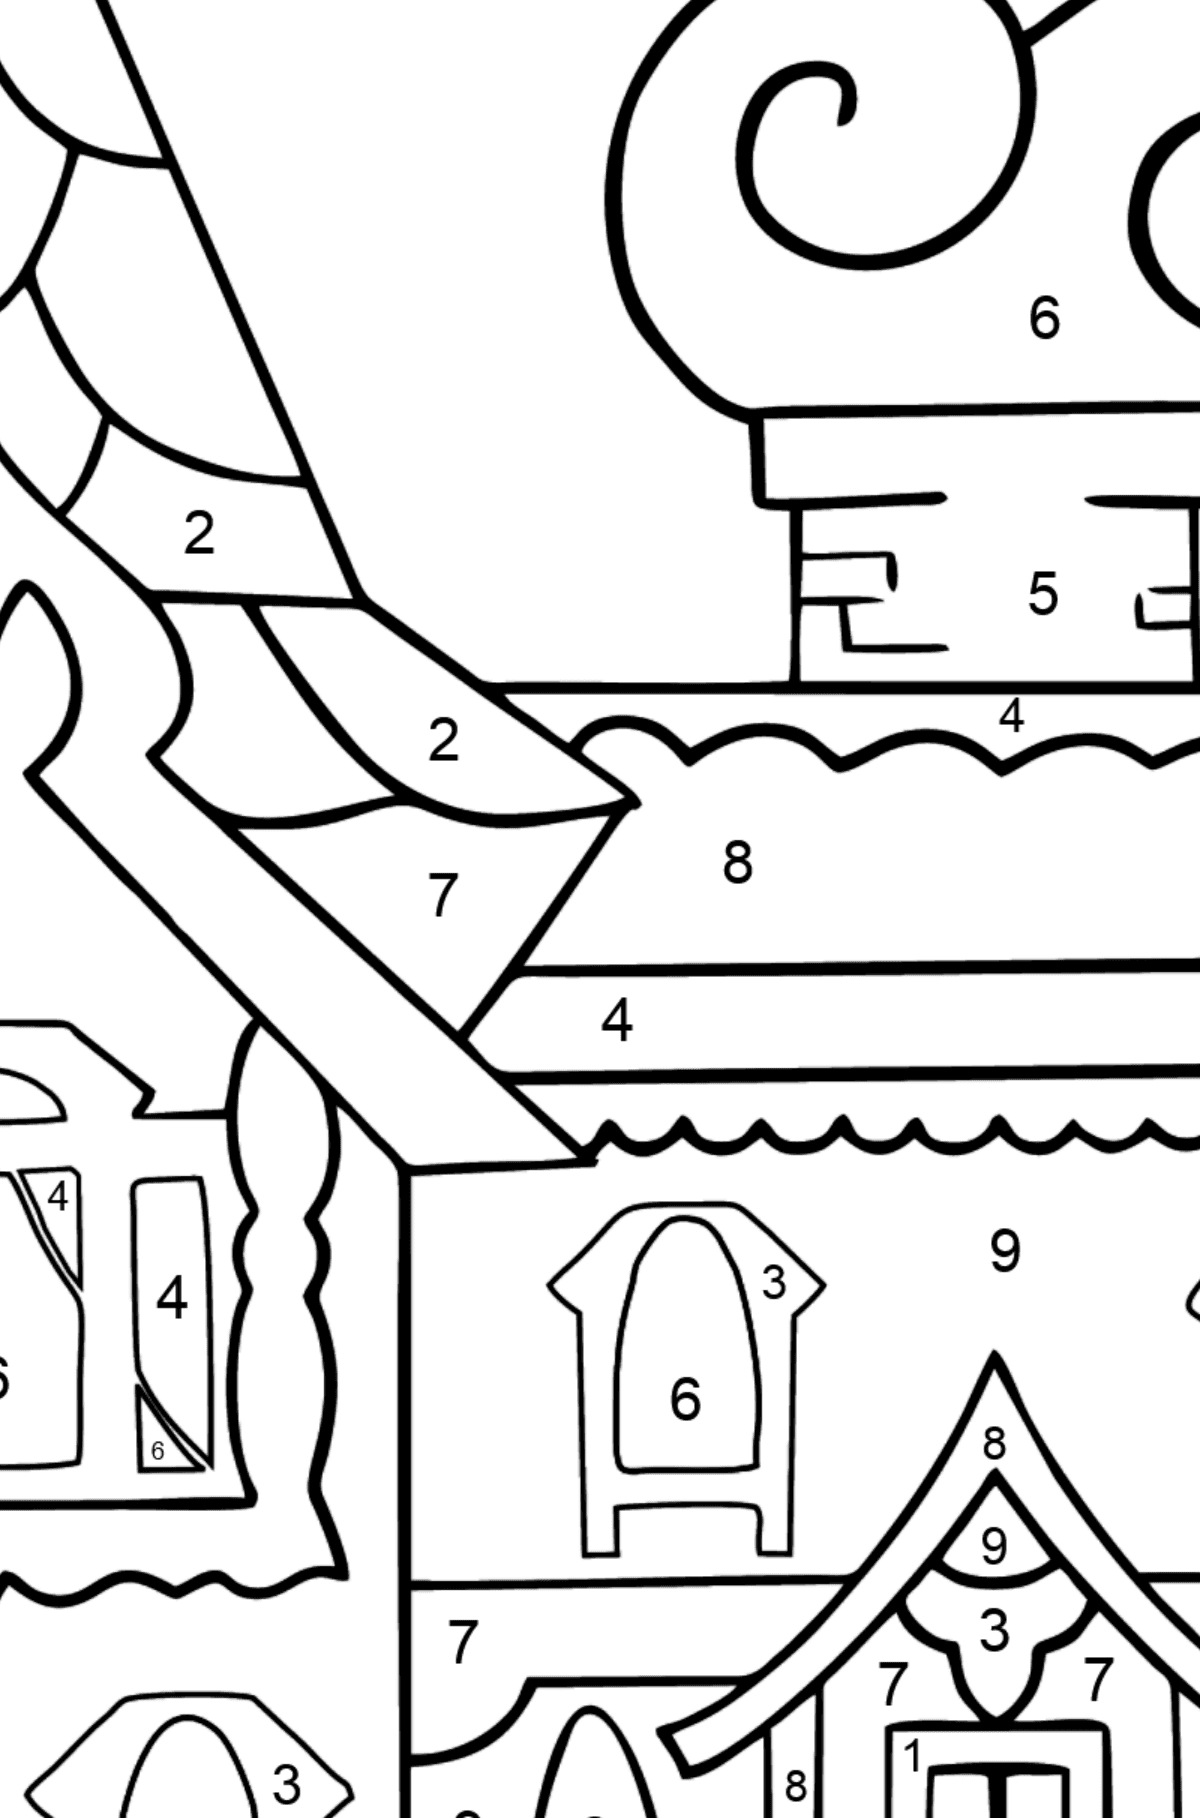 Coloring Page - A House - A Kingdom of Storytellers - Coloring by Numbers for Kids